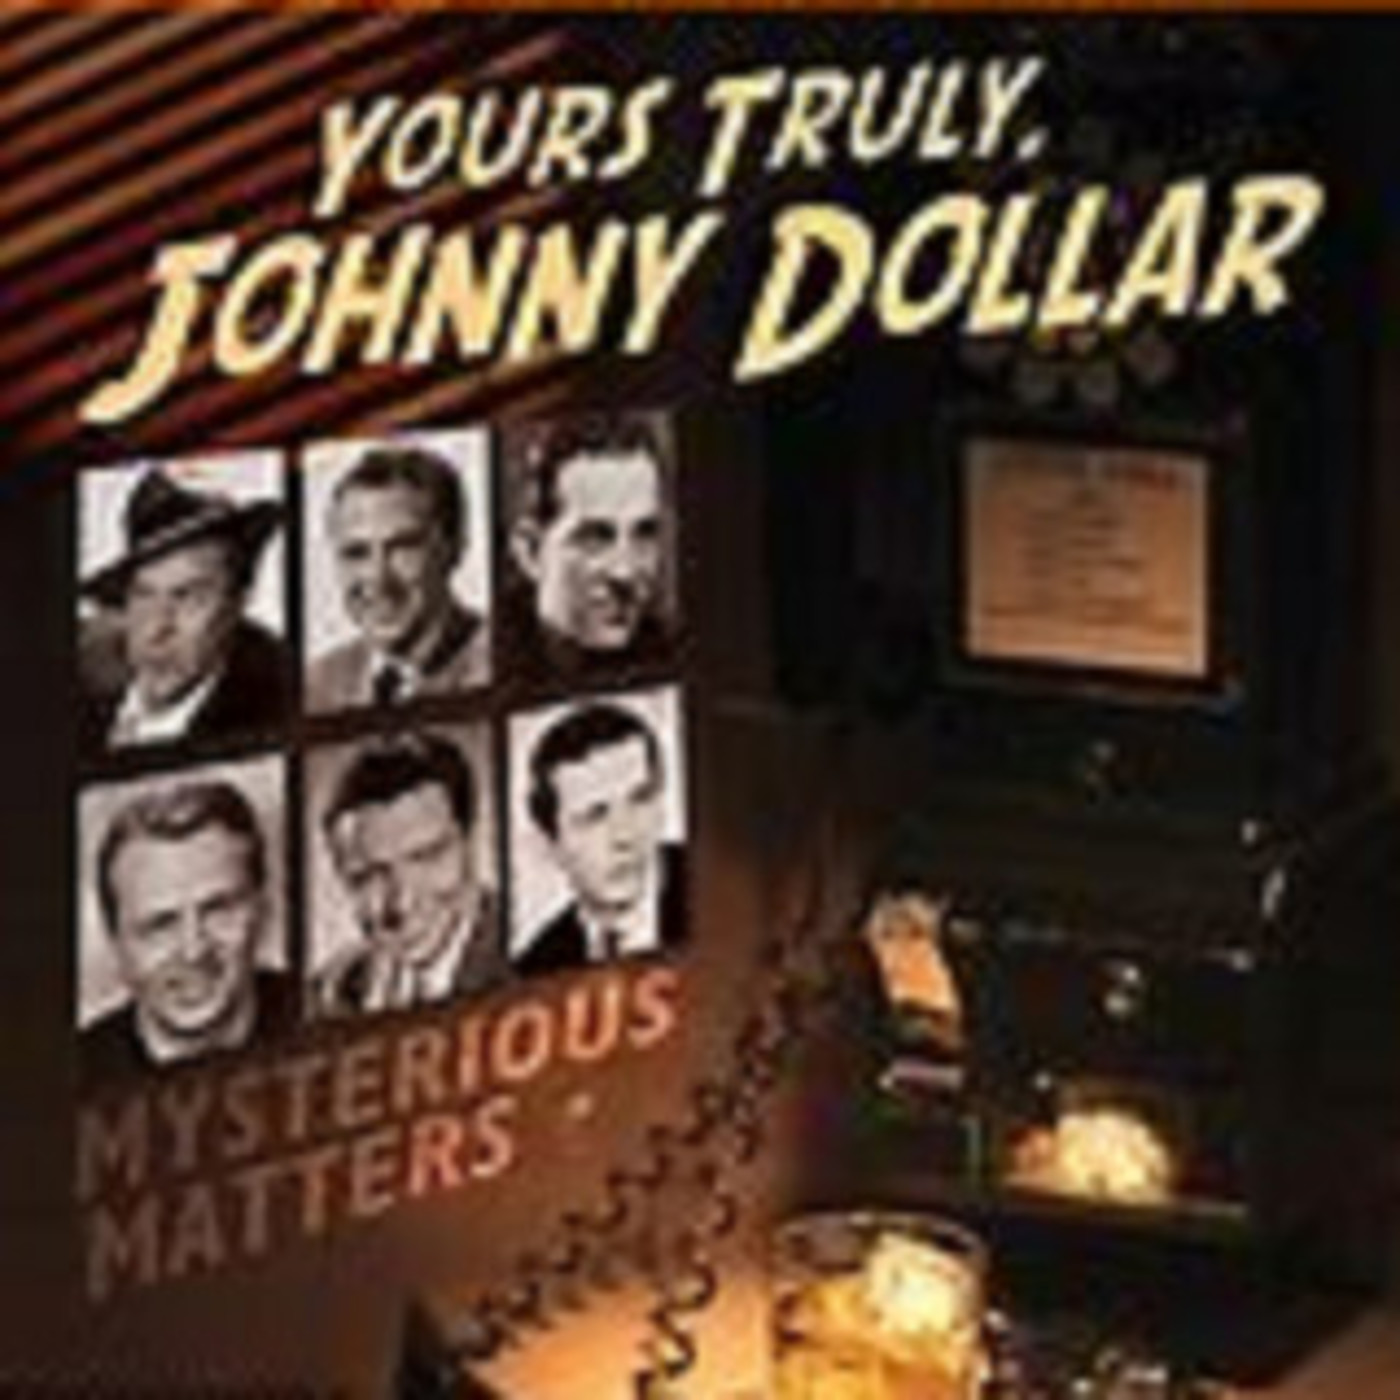 Yours Truly, Johnny Dollar - 070862, episode 799 - The Rilldoe Matter